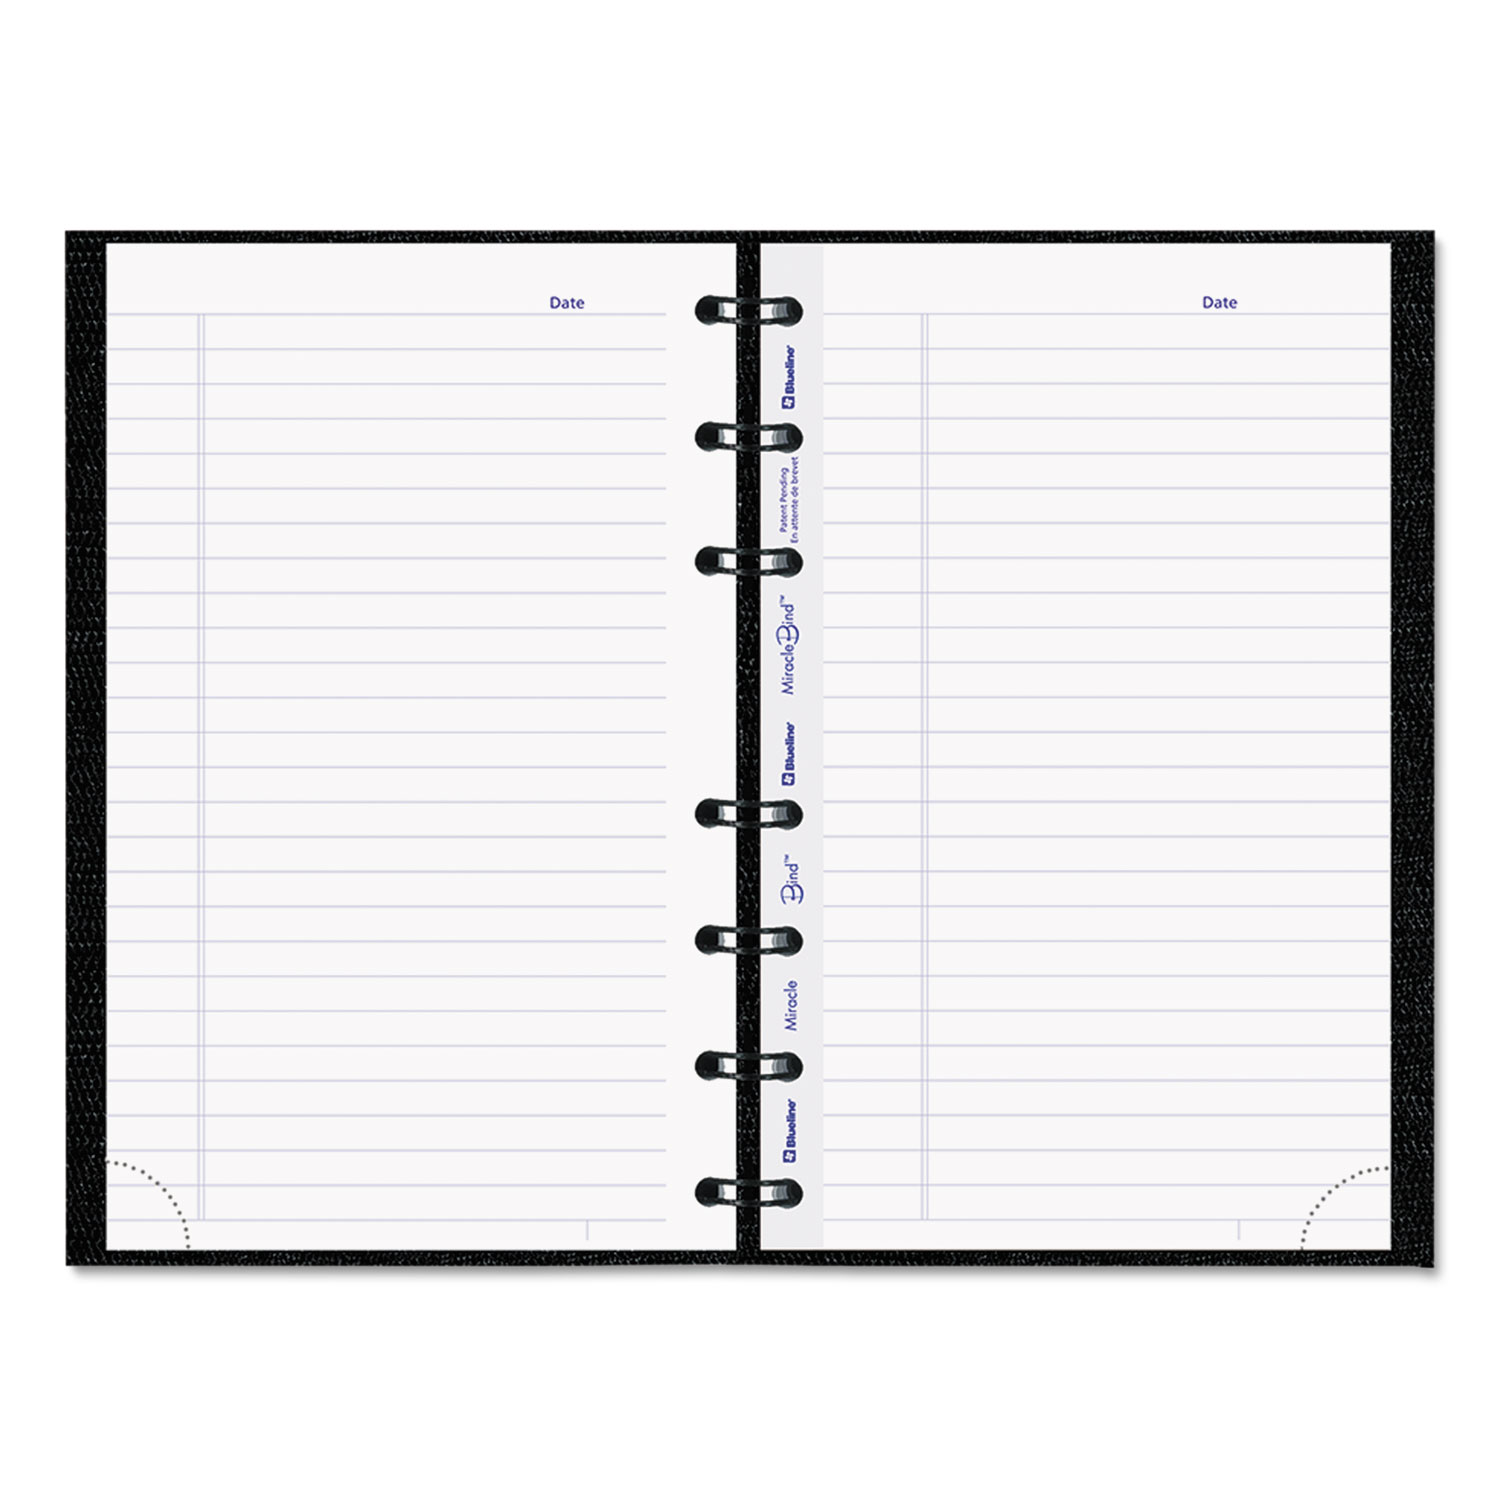 Blueline® MiracleBind Notebook, 1 Subject, Medium/College Rule, Black Cover, 8 x 5, 75 Sheets